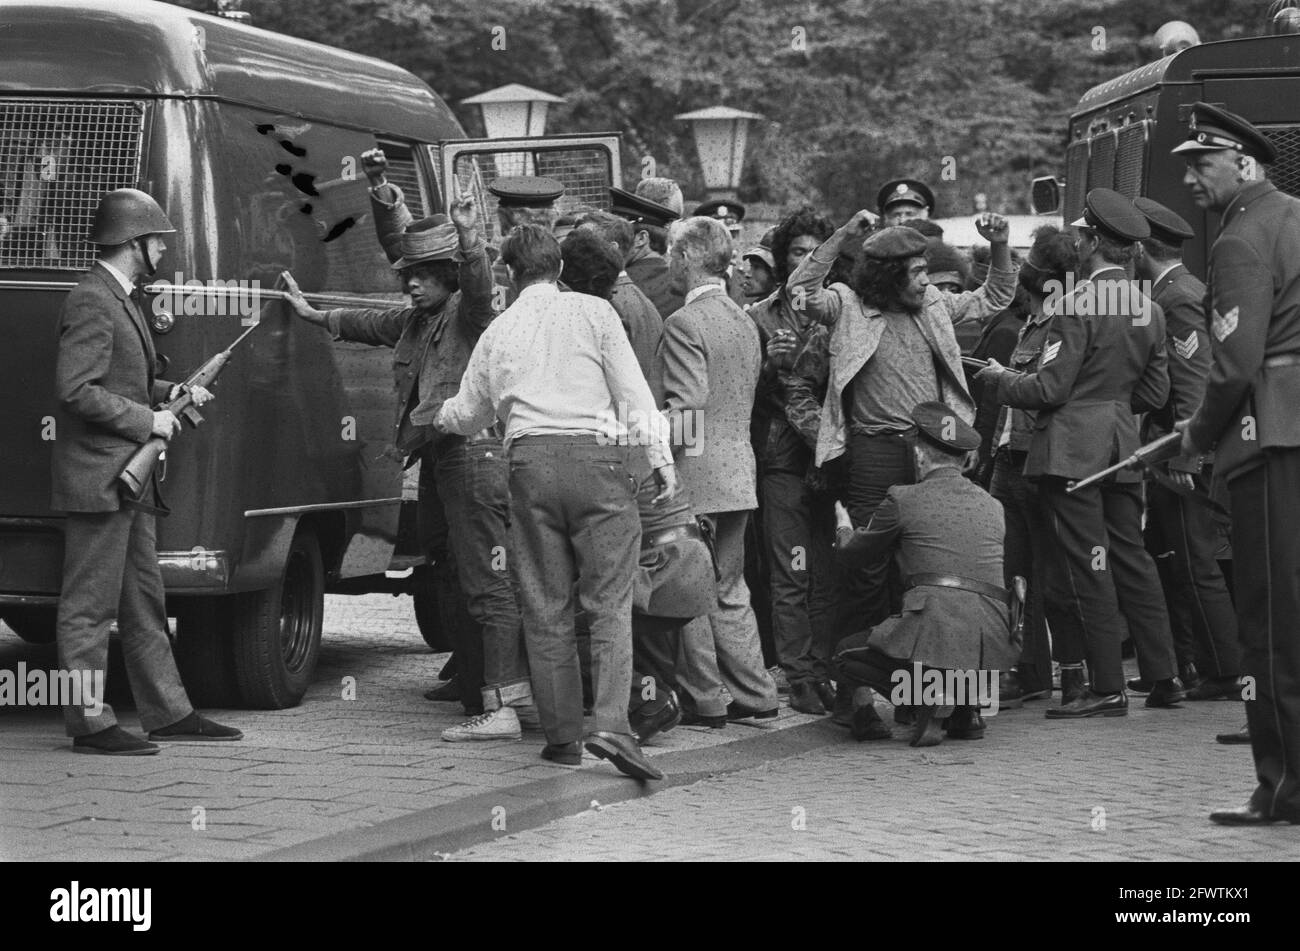 Ambonese occupy residence Indonesian Ambassador, Wassenaar; Ambonese are searched before entering police car, August 31, 1970, Ambonese, police cars, The Netherlands, 20th century press agency photo, news to remember, documentary, historic photography 1945-1990, visual stories, human history of the Twentieth Century, capturing moments in time Stock Photo